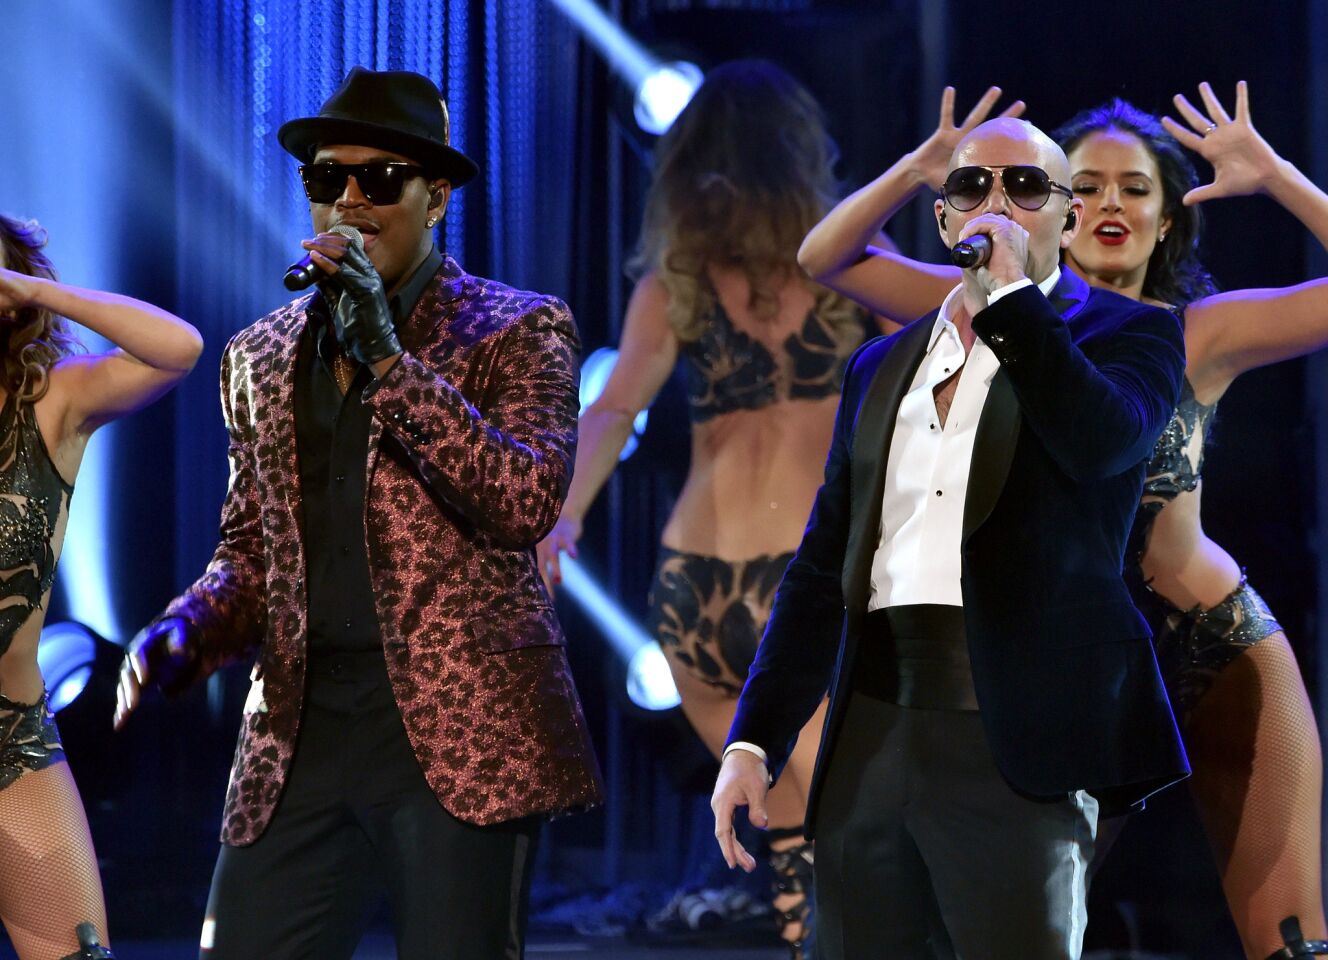 Recording artist Ne-Yo, left, and host Pitbull take to the stage.